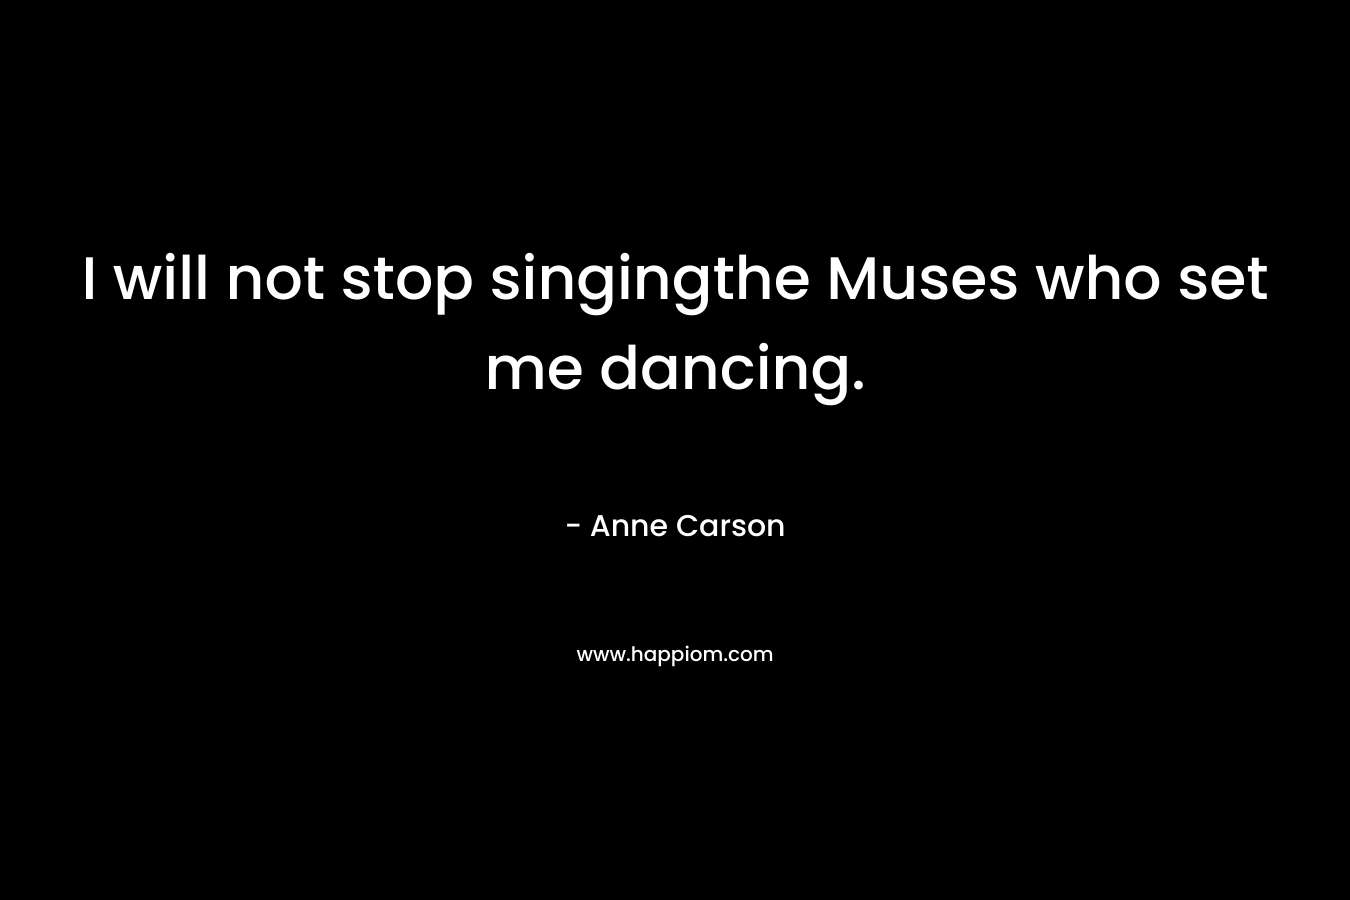 I will not stop singingthe Muses who set me dancing. – Anne Carson